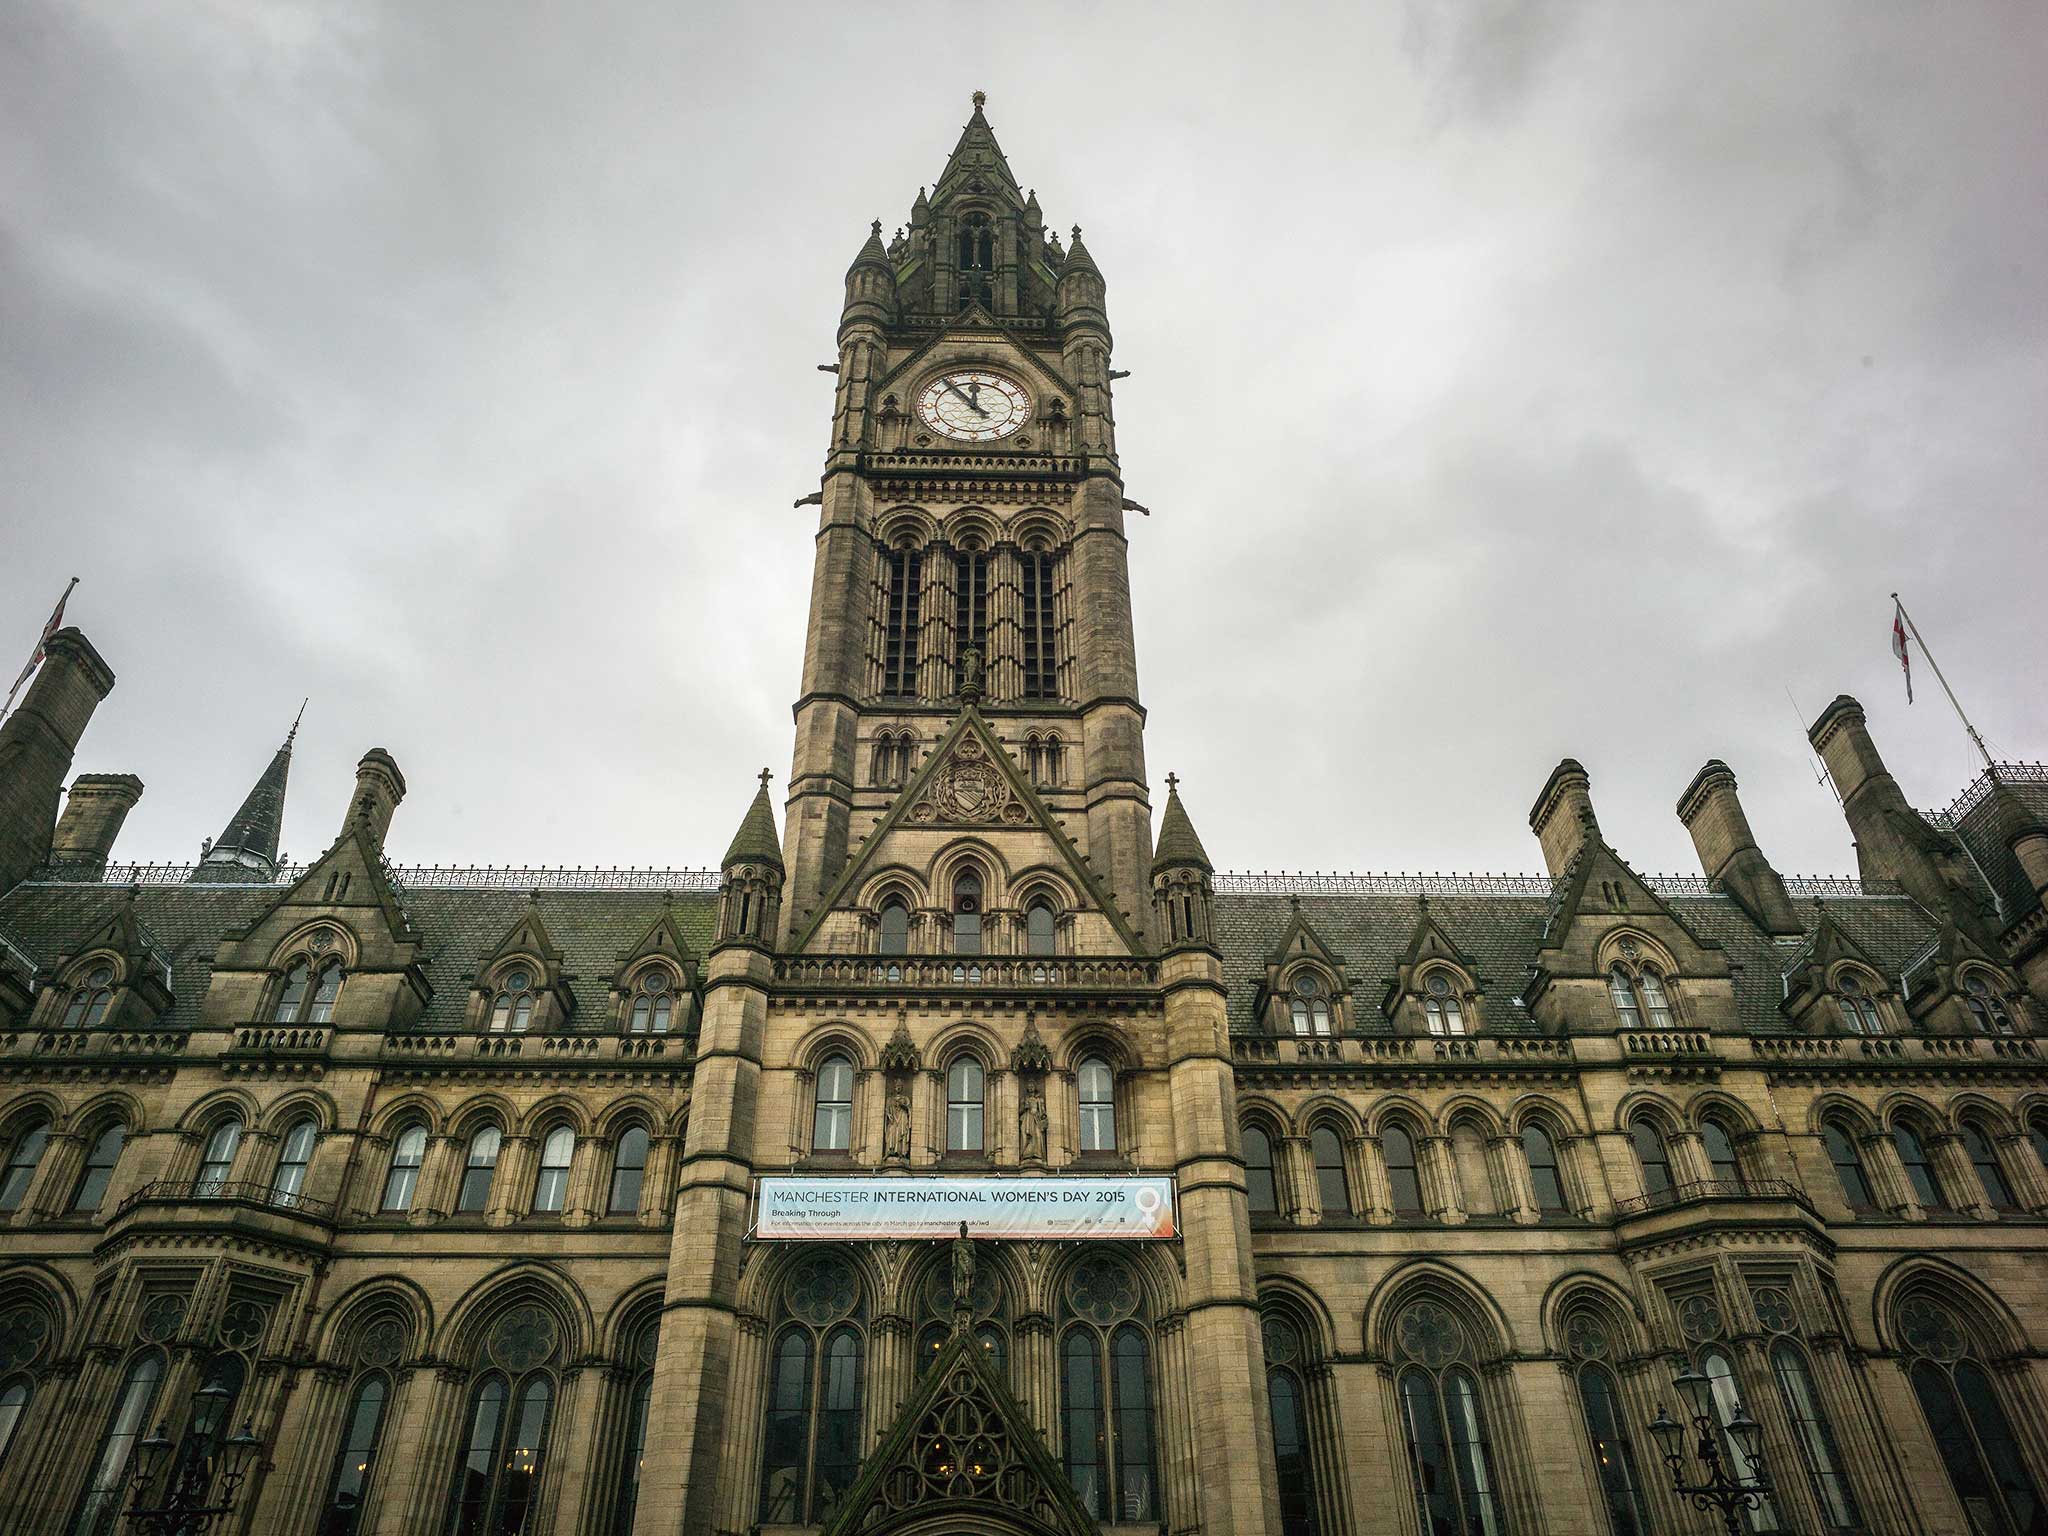 The final result will be announced at Manchester Town Hall